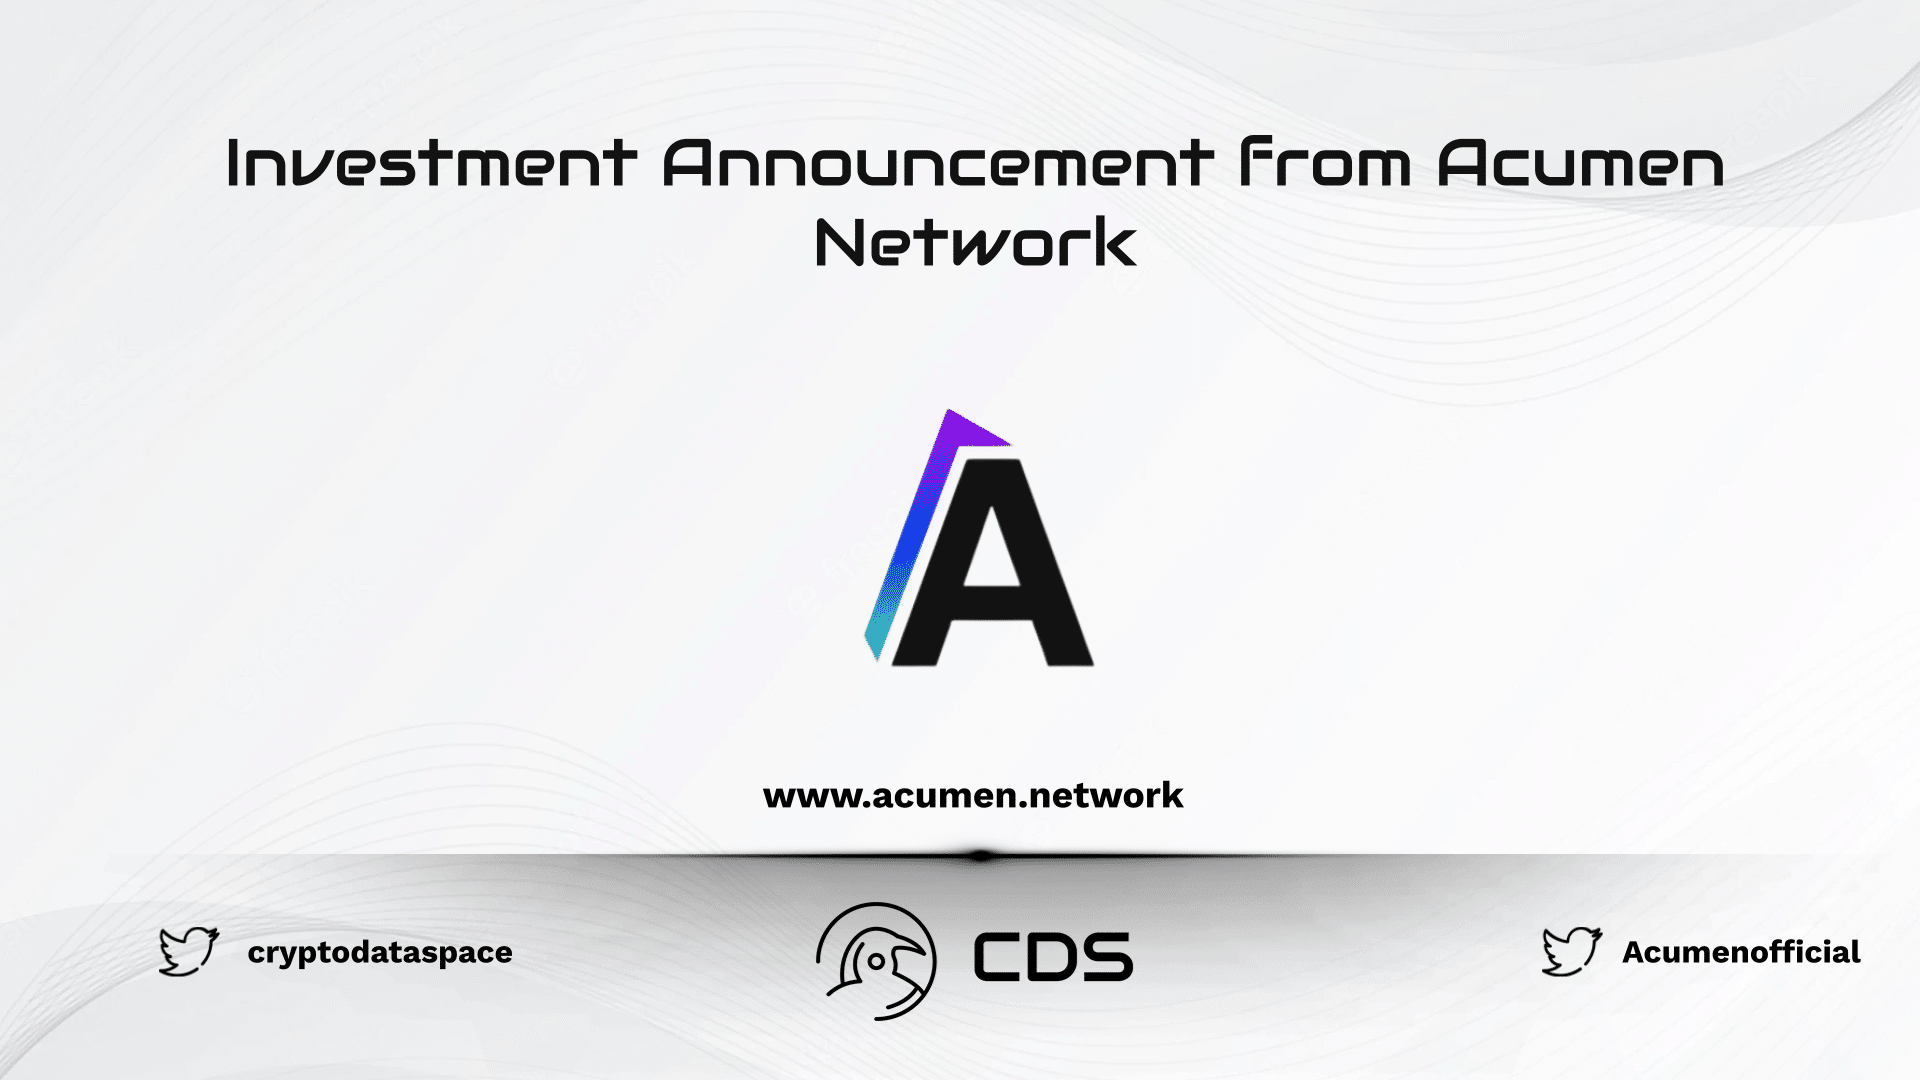 Investment Announcement from Acumen Network